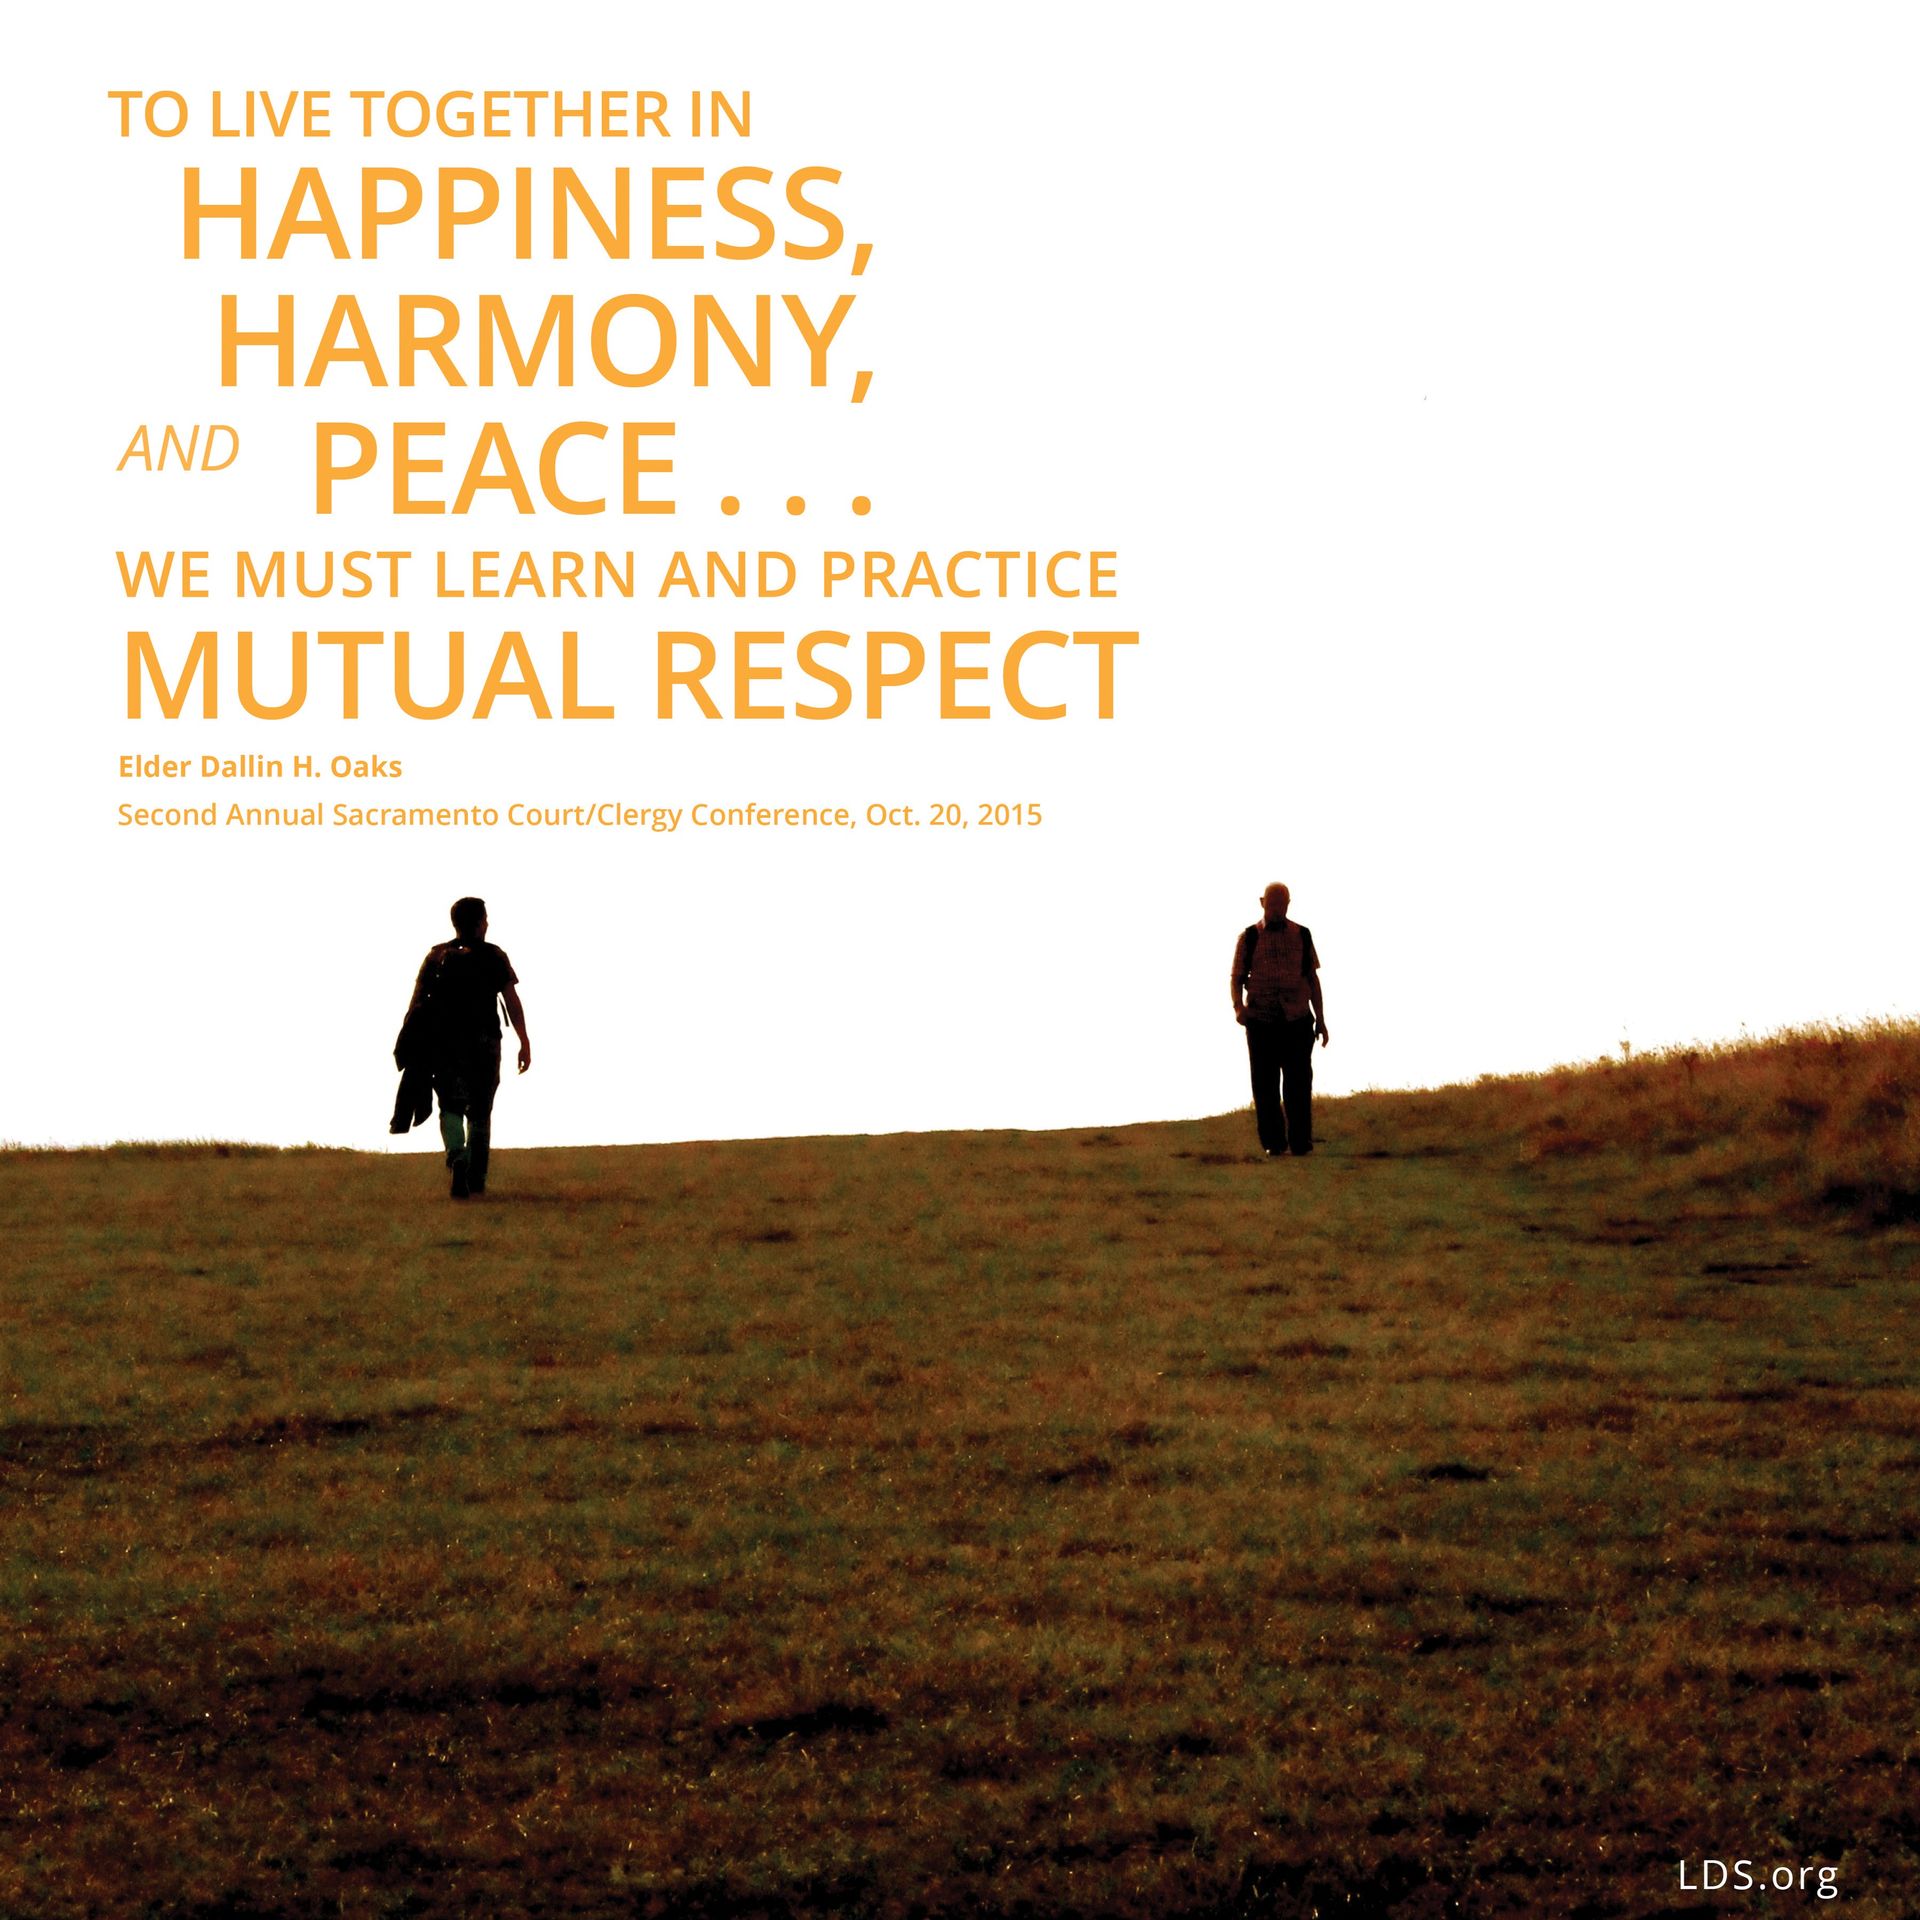 “To live together in happiness, harmony, and peace … we must learn and practice mutual respect.”—Elder Dallin H. Oaks, Second Annual Sacramento Court/Clergy Conference, Oct. 20, 2015